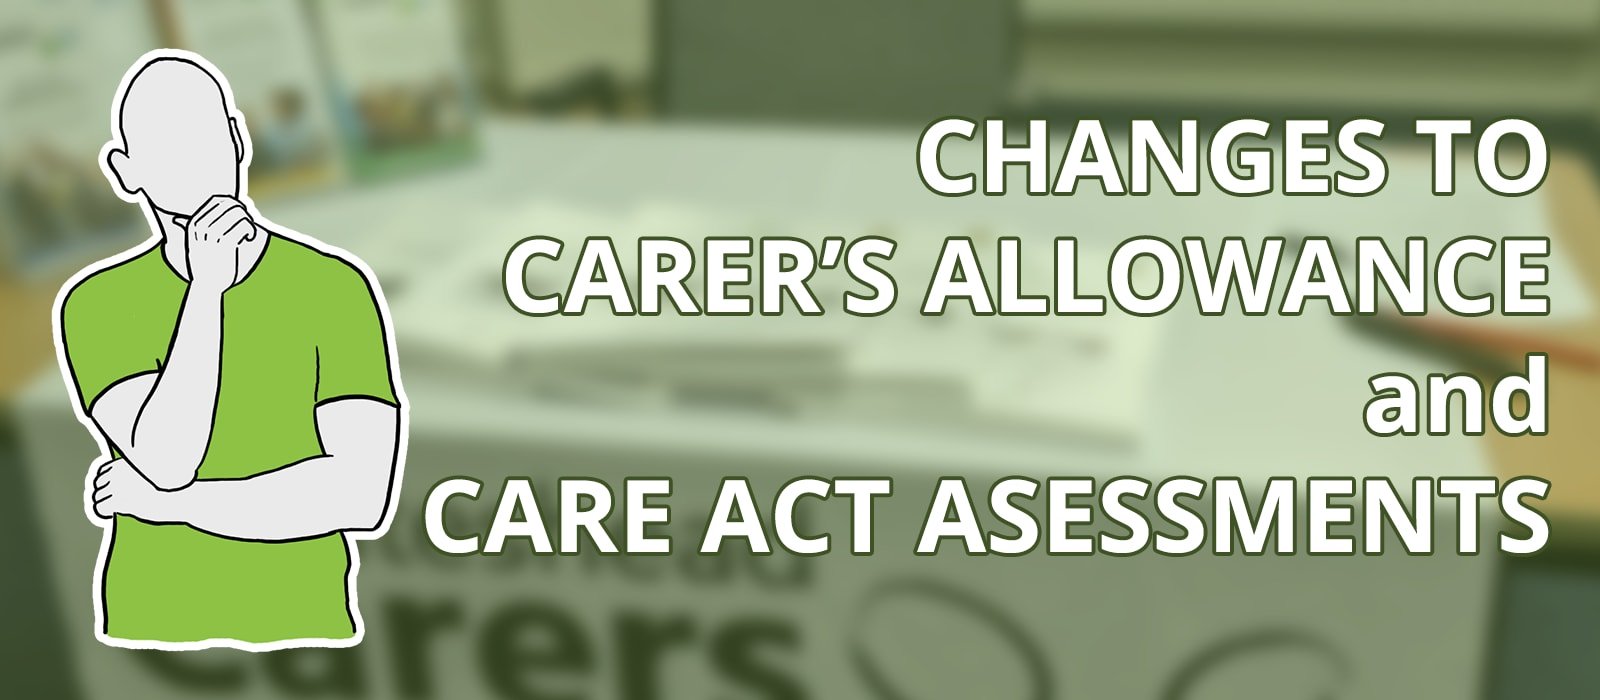 Important change to Carers Allowance and Care Act Assessments